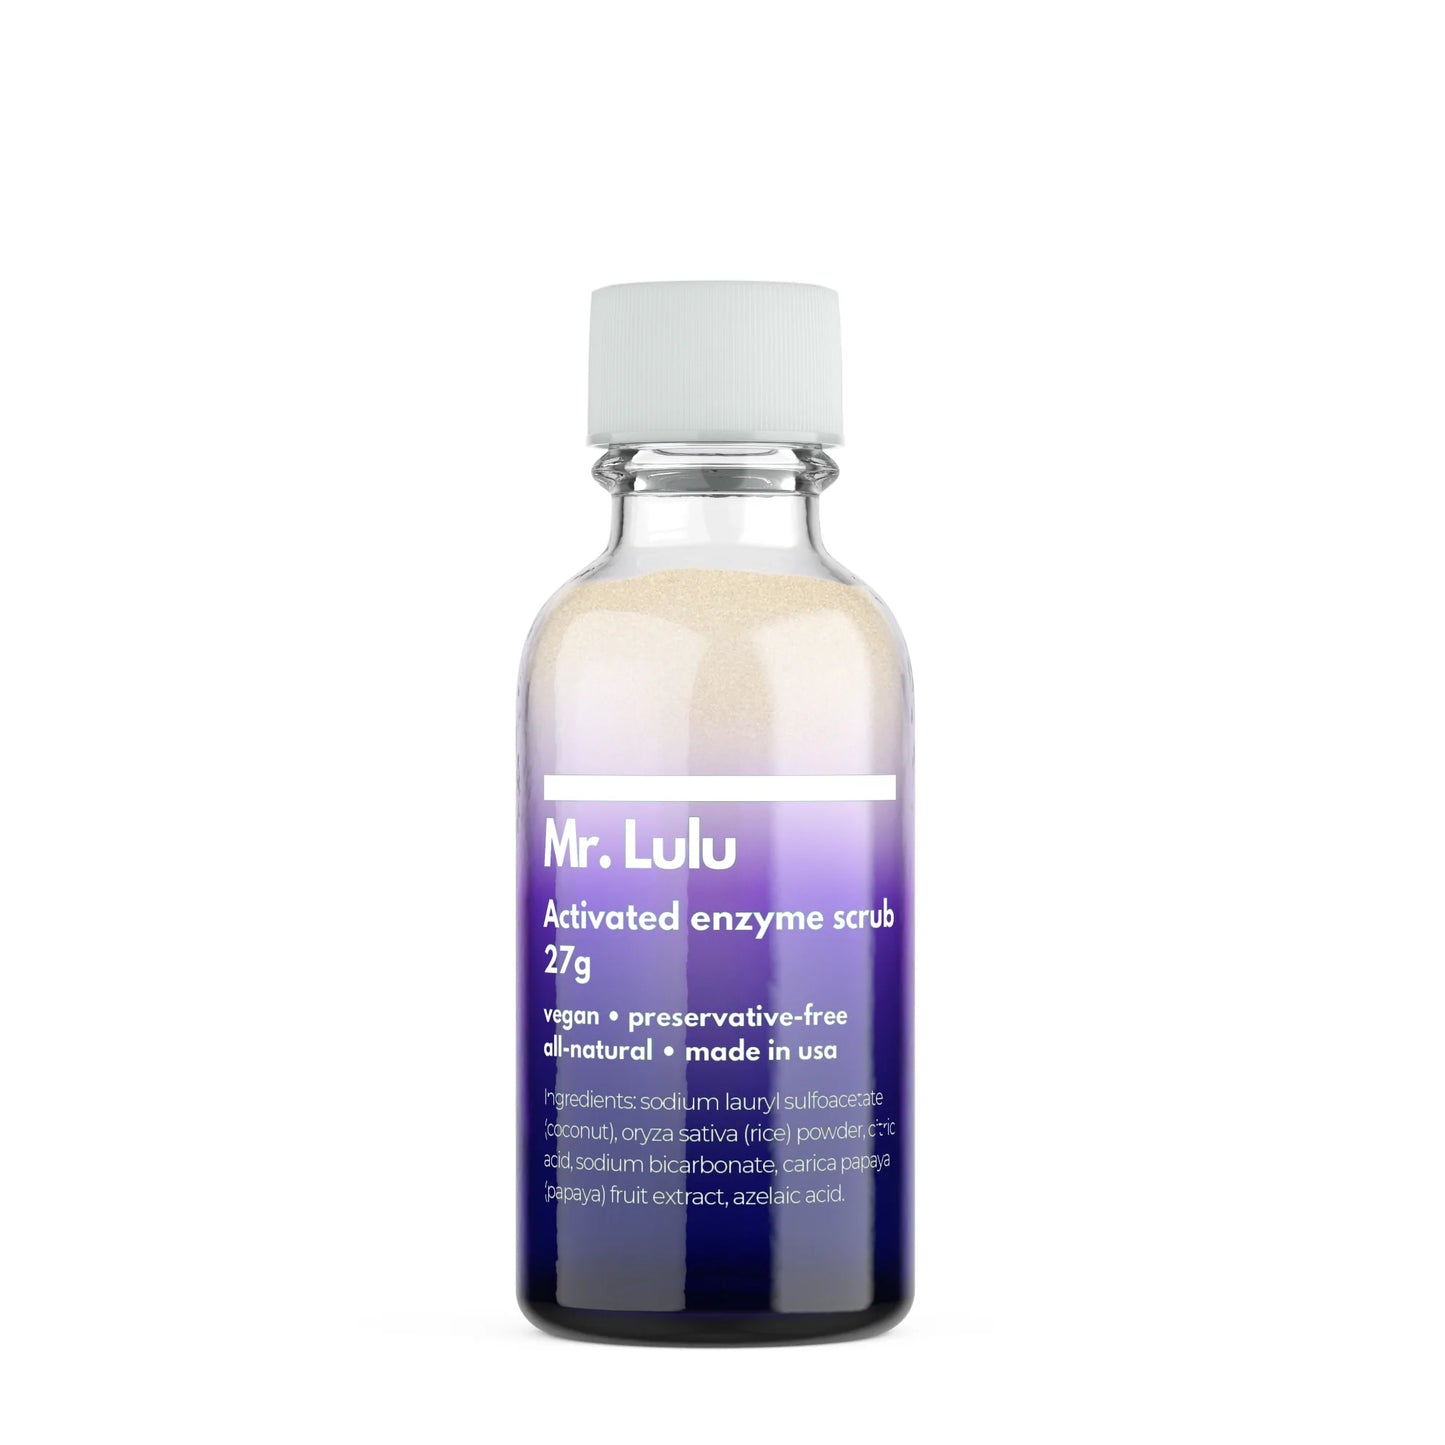 Mr. LuLu Activated Enzyme Scrub